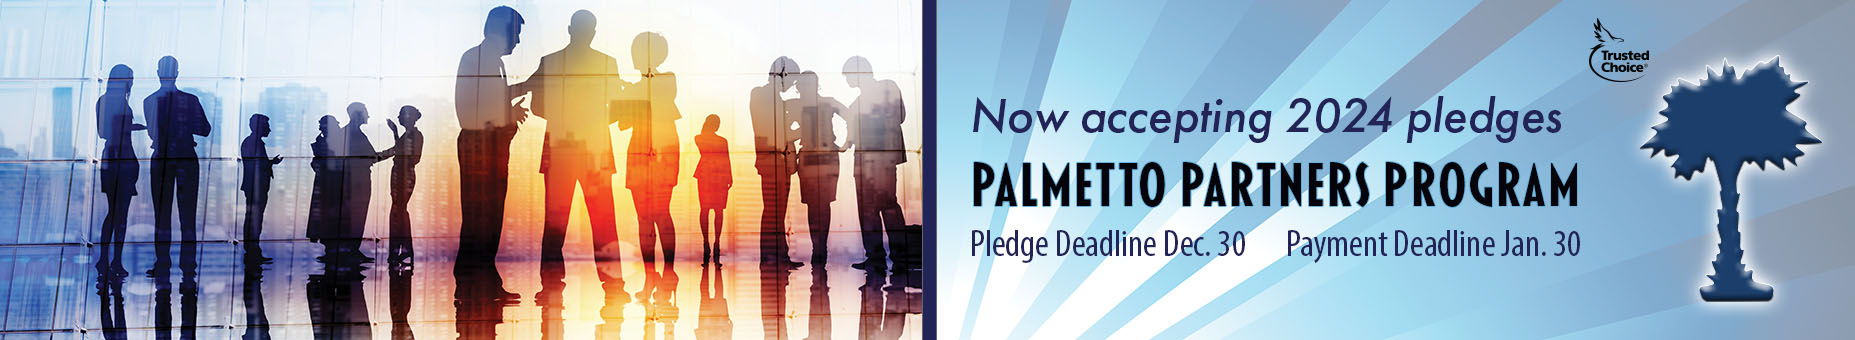 Pledge to be a Palmetto Partner in 2024